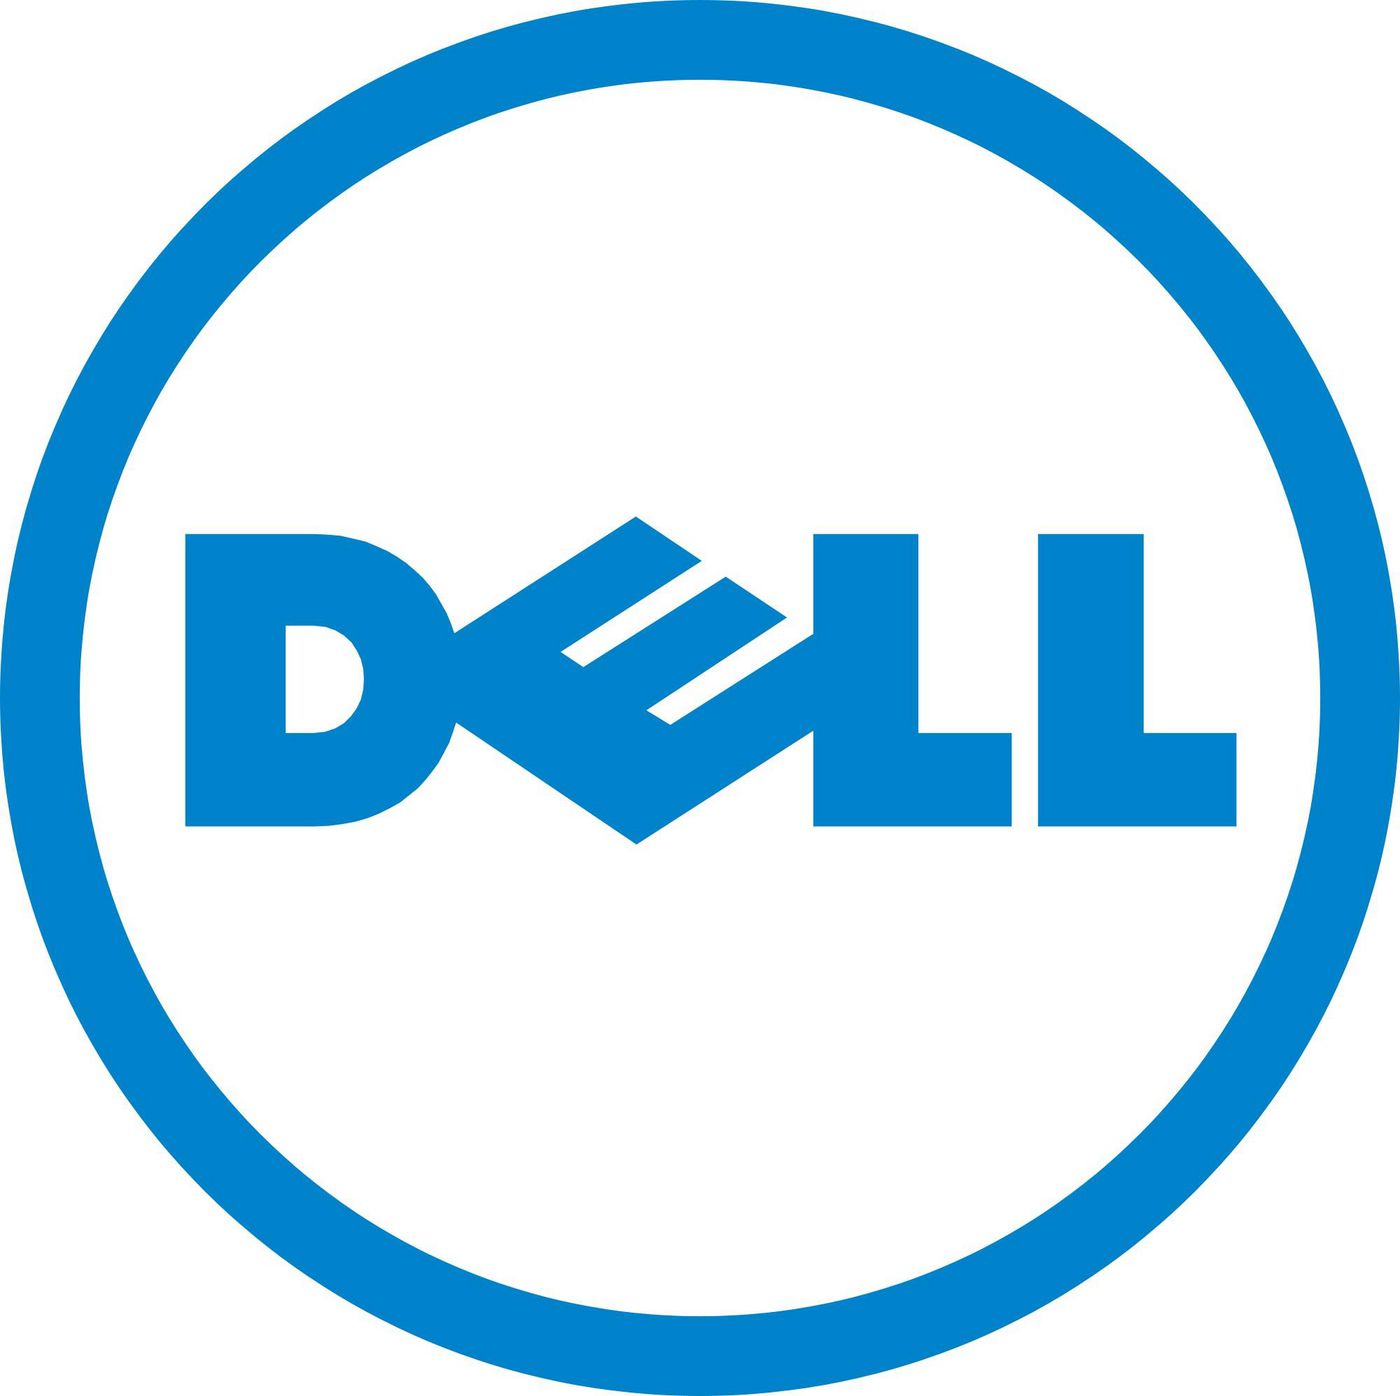 DELL 5 Year Gold Hardware Maintenance by Avocent for the Dell DAV2108